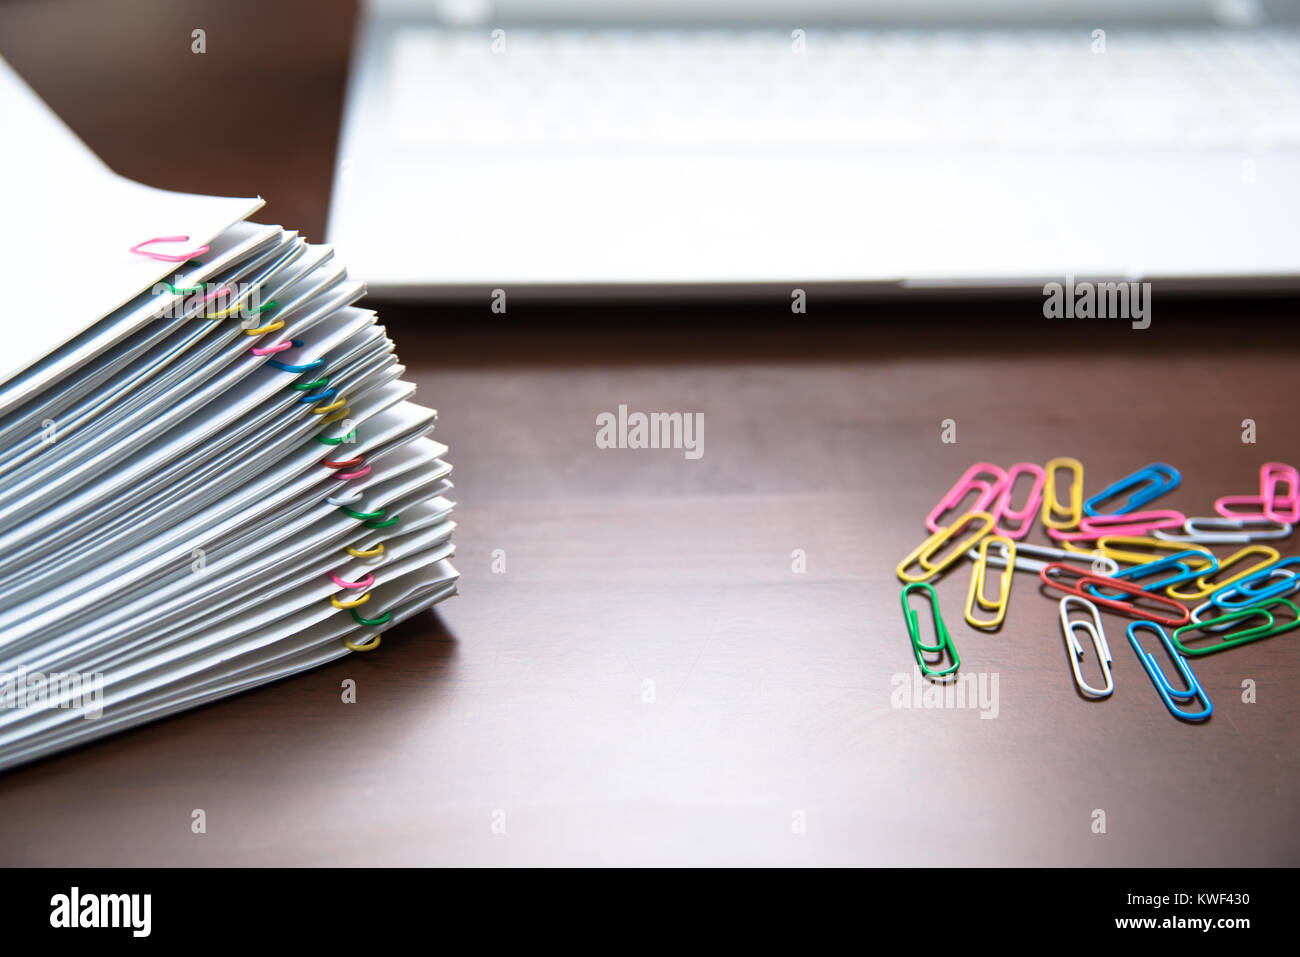 Pile of paper with colorful clips Stock Photo